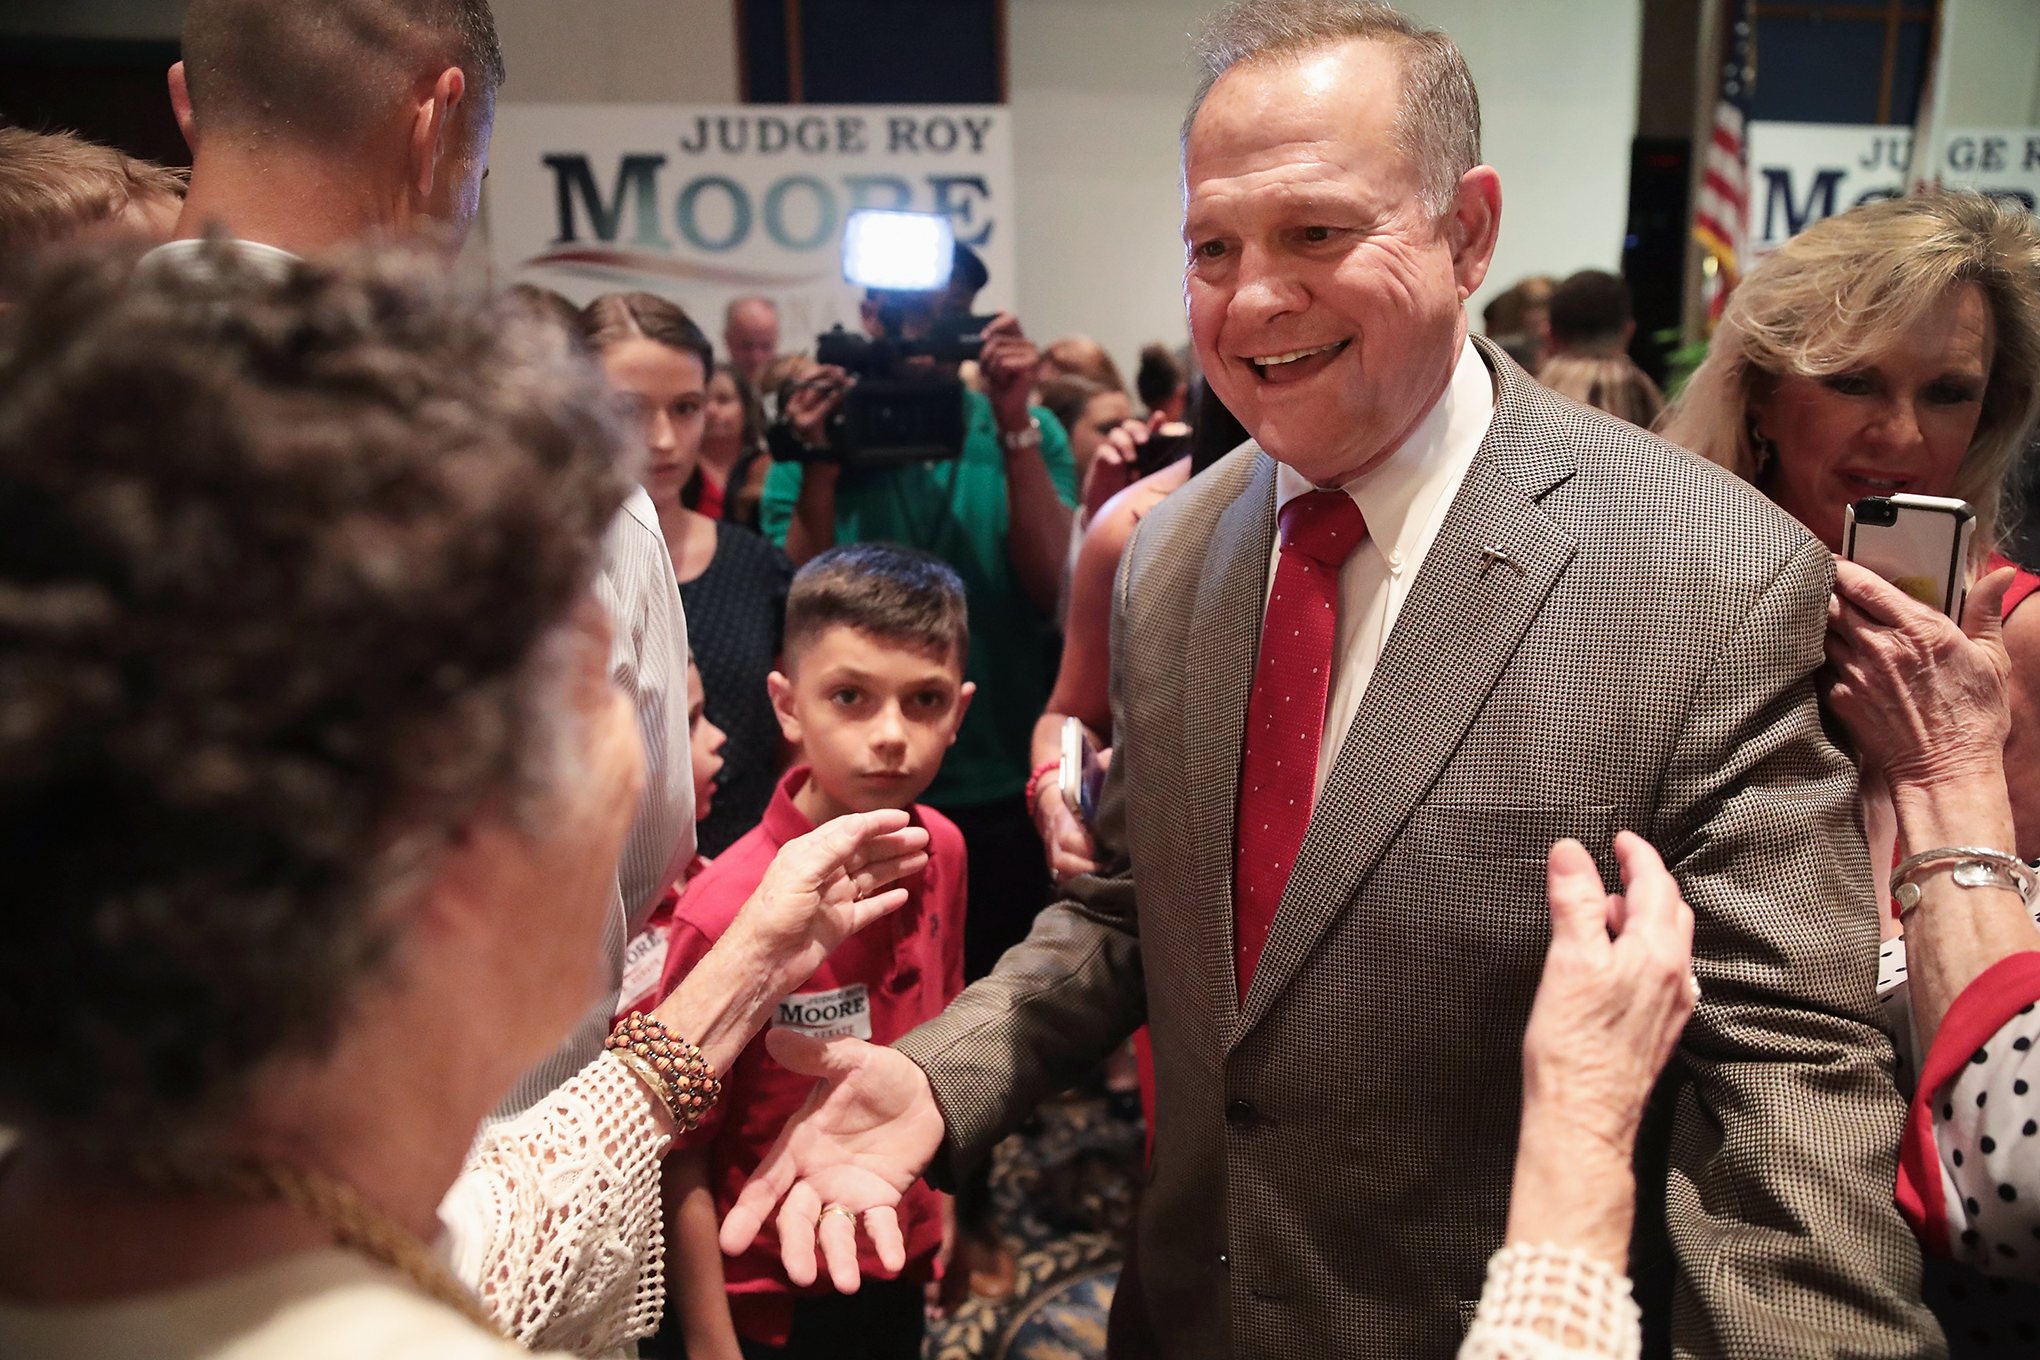 Moore greets supporters on Sept. 26 after winning the Republican primary in the special election for Alabama’s open Senate seat (Scott Olson—Getty Images)